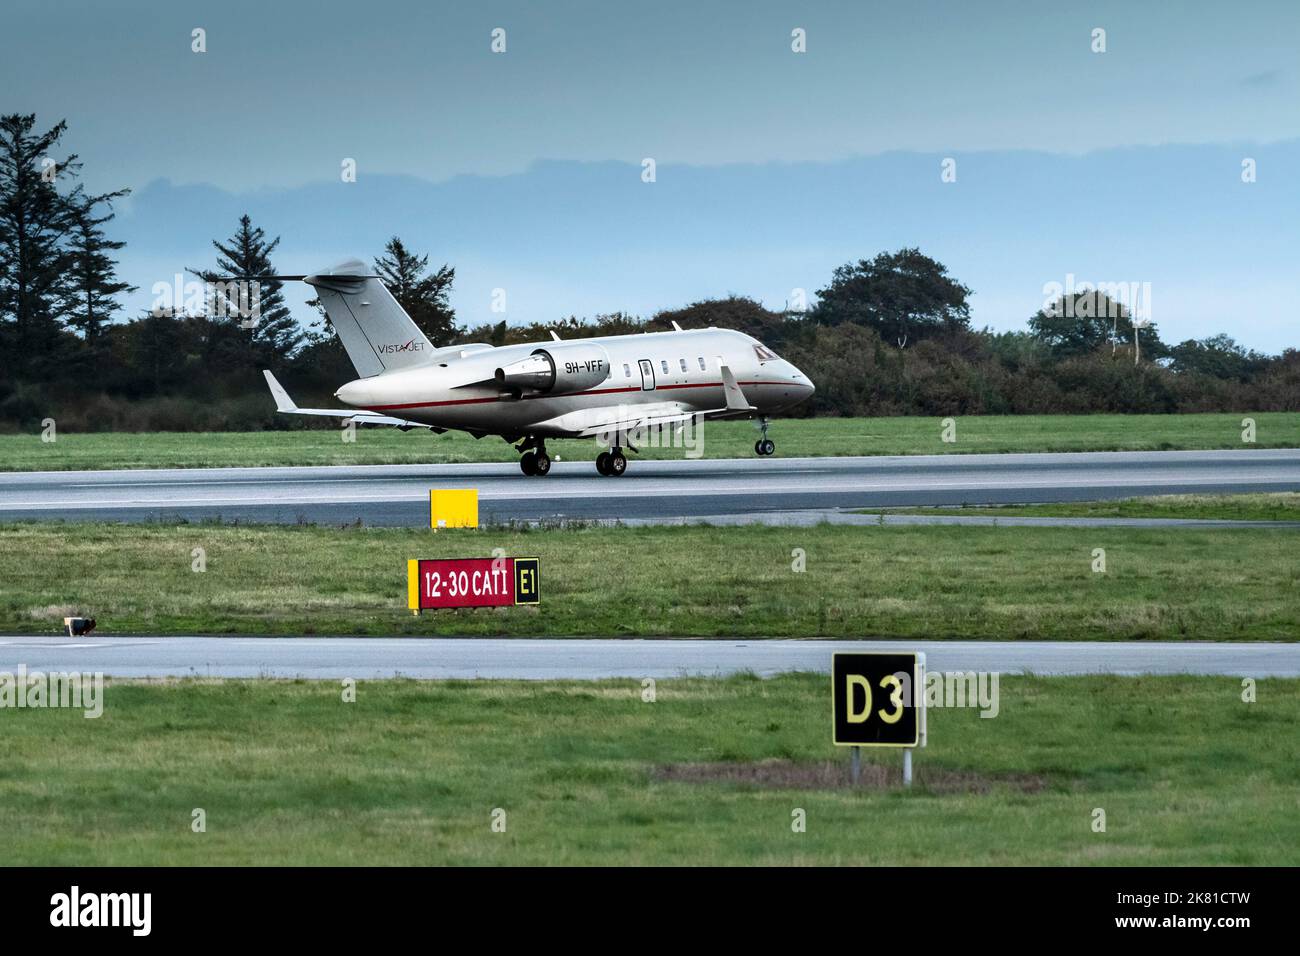 A Bombardier Challenger 605 9H-VFF Vista Jet taking off from the runway at Newquay Airport in Cornwall in the UK. Stock Photo